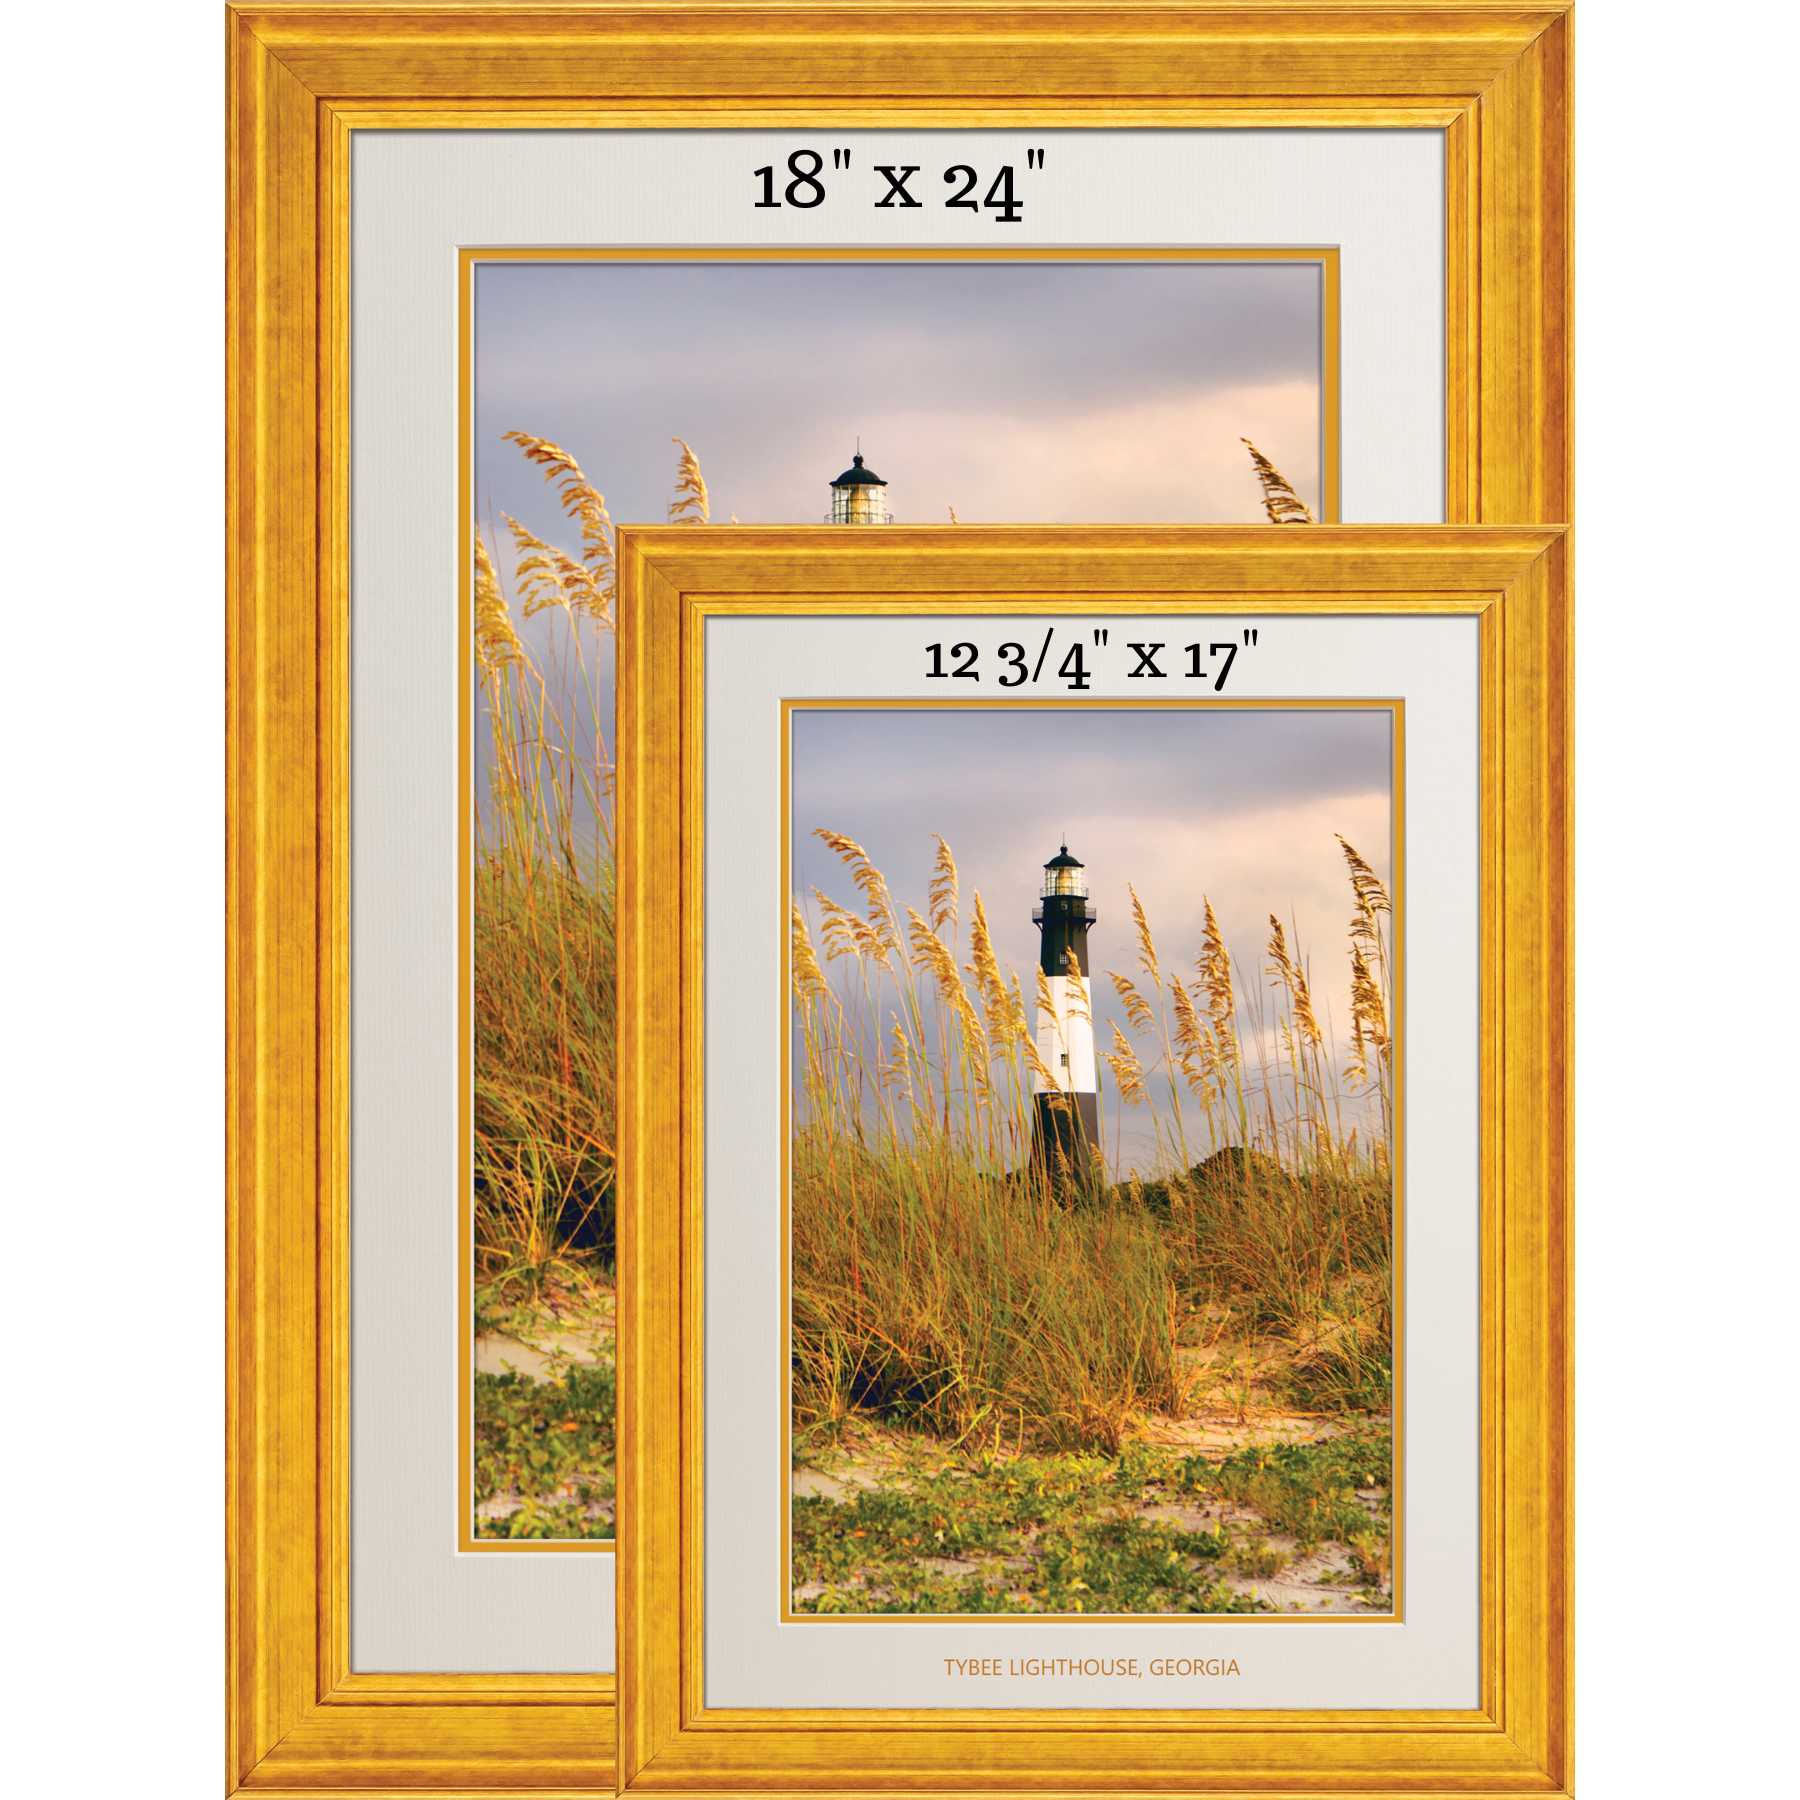 Tybee Lighthouse Poster - Moveable and Removeable!